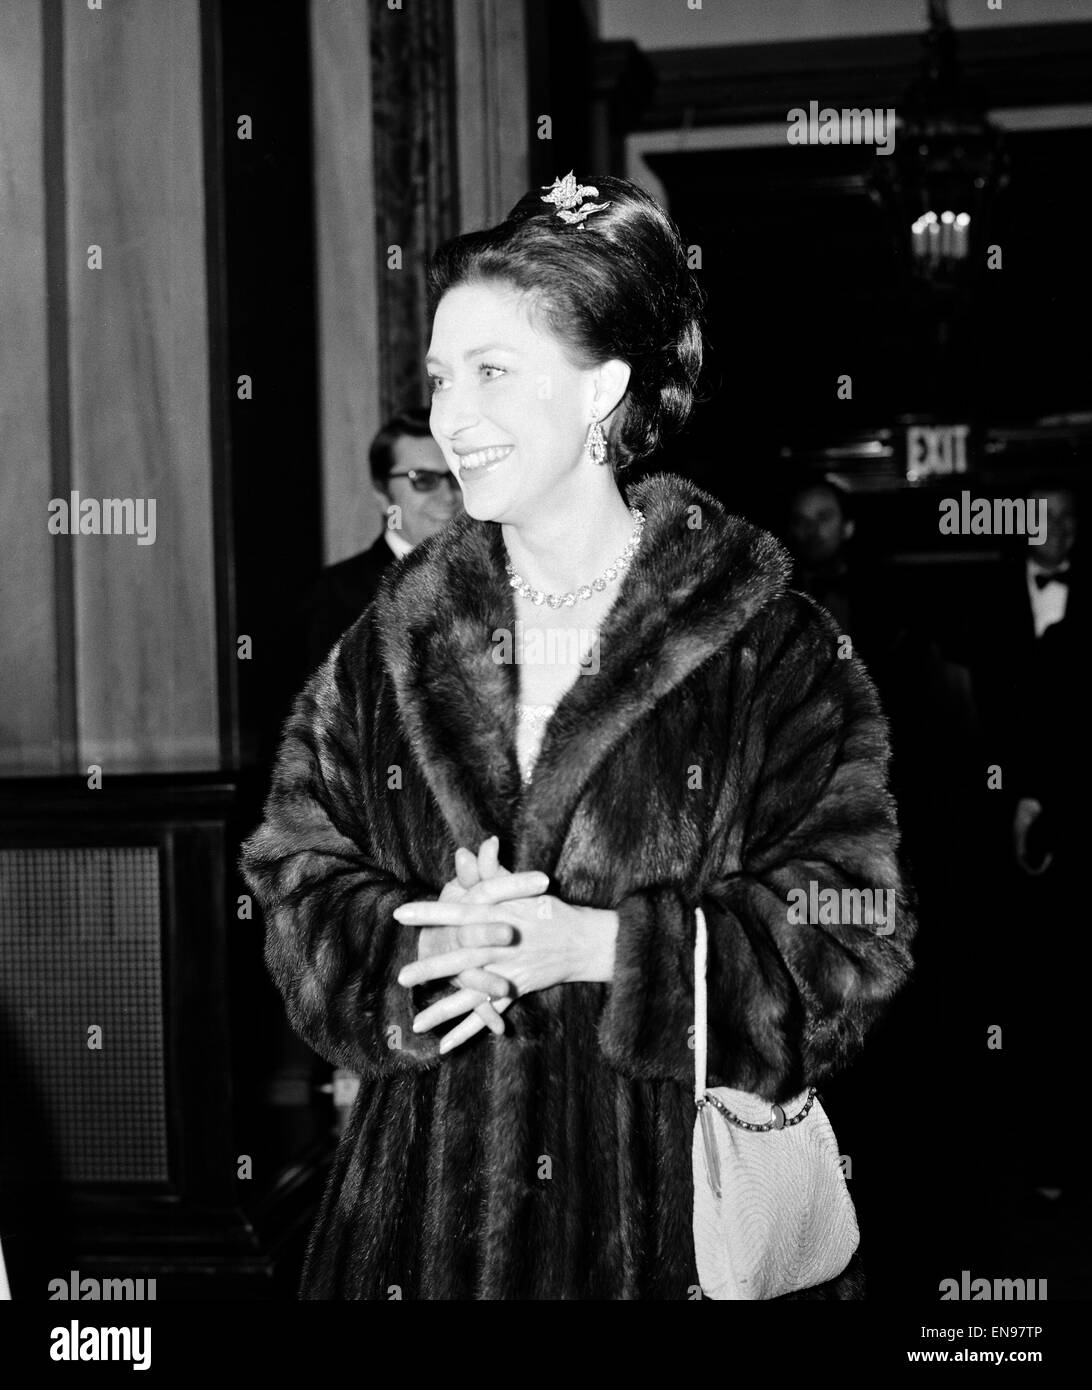 Princess Margaret arriving at The Royal Opera House to see a ballet premiere starring Margot Fonteyn and Rudolph Nureyev. She dropped in backstage when the Rolling Stones toured in 1976. 23rd February 1967. Stock Photo